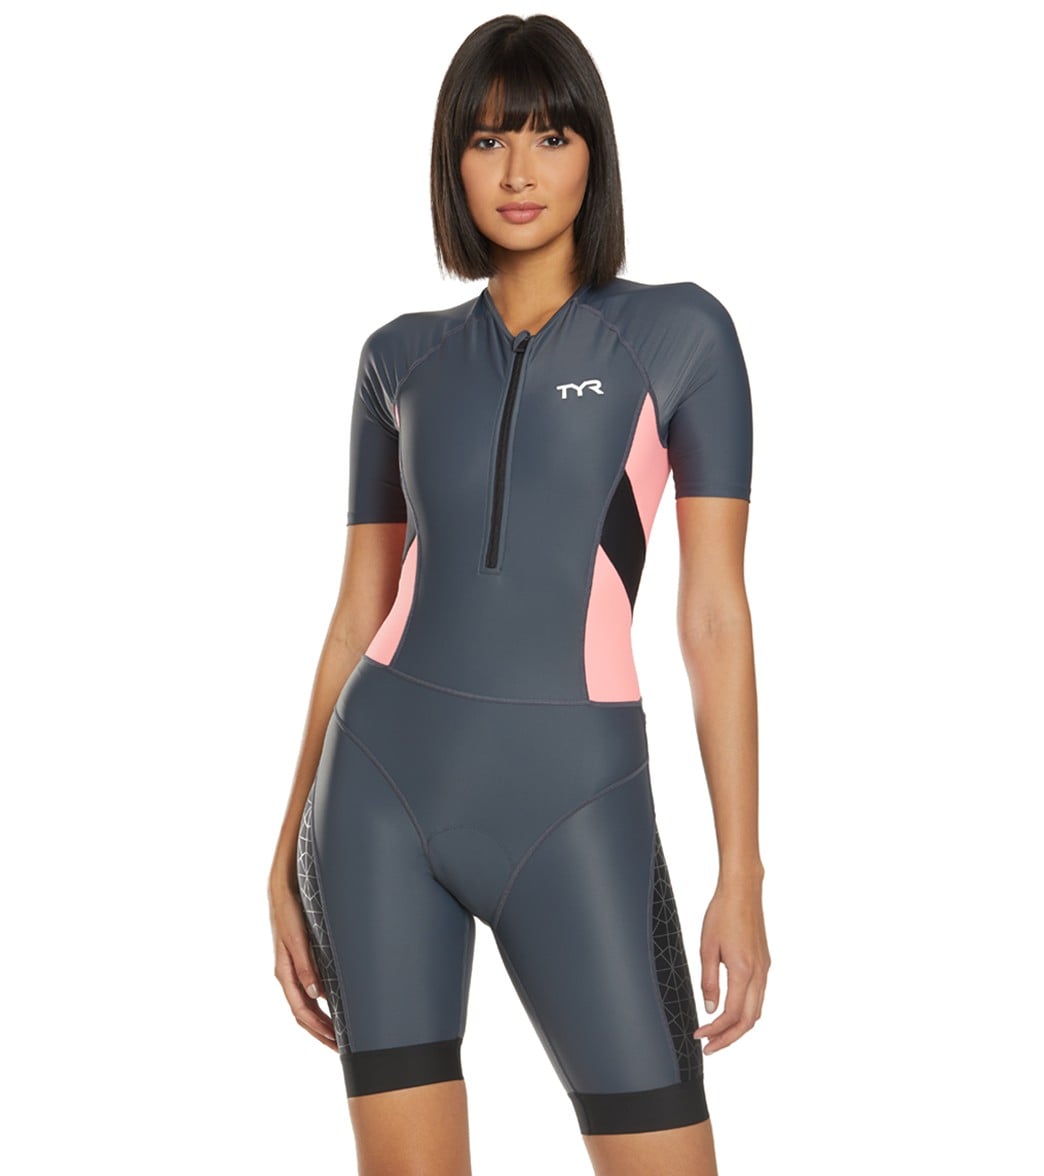 TYR Women's Competitor Speedsuit - Grey/Coral Large - Swimoutlet.com